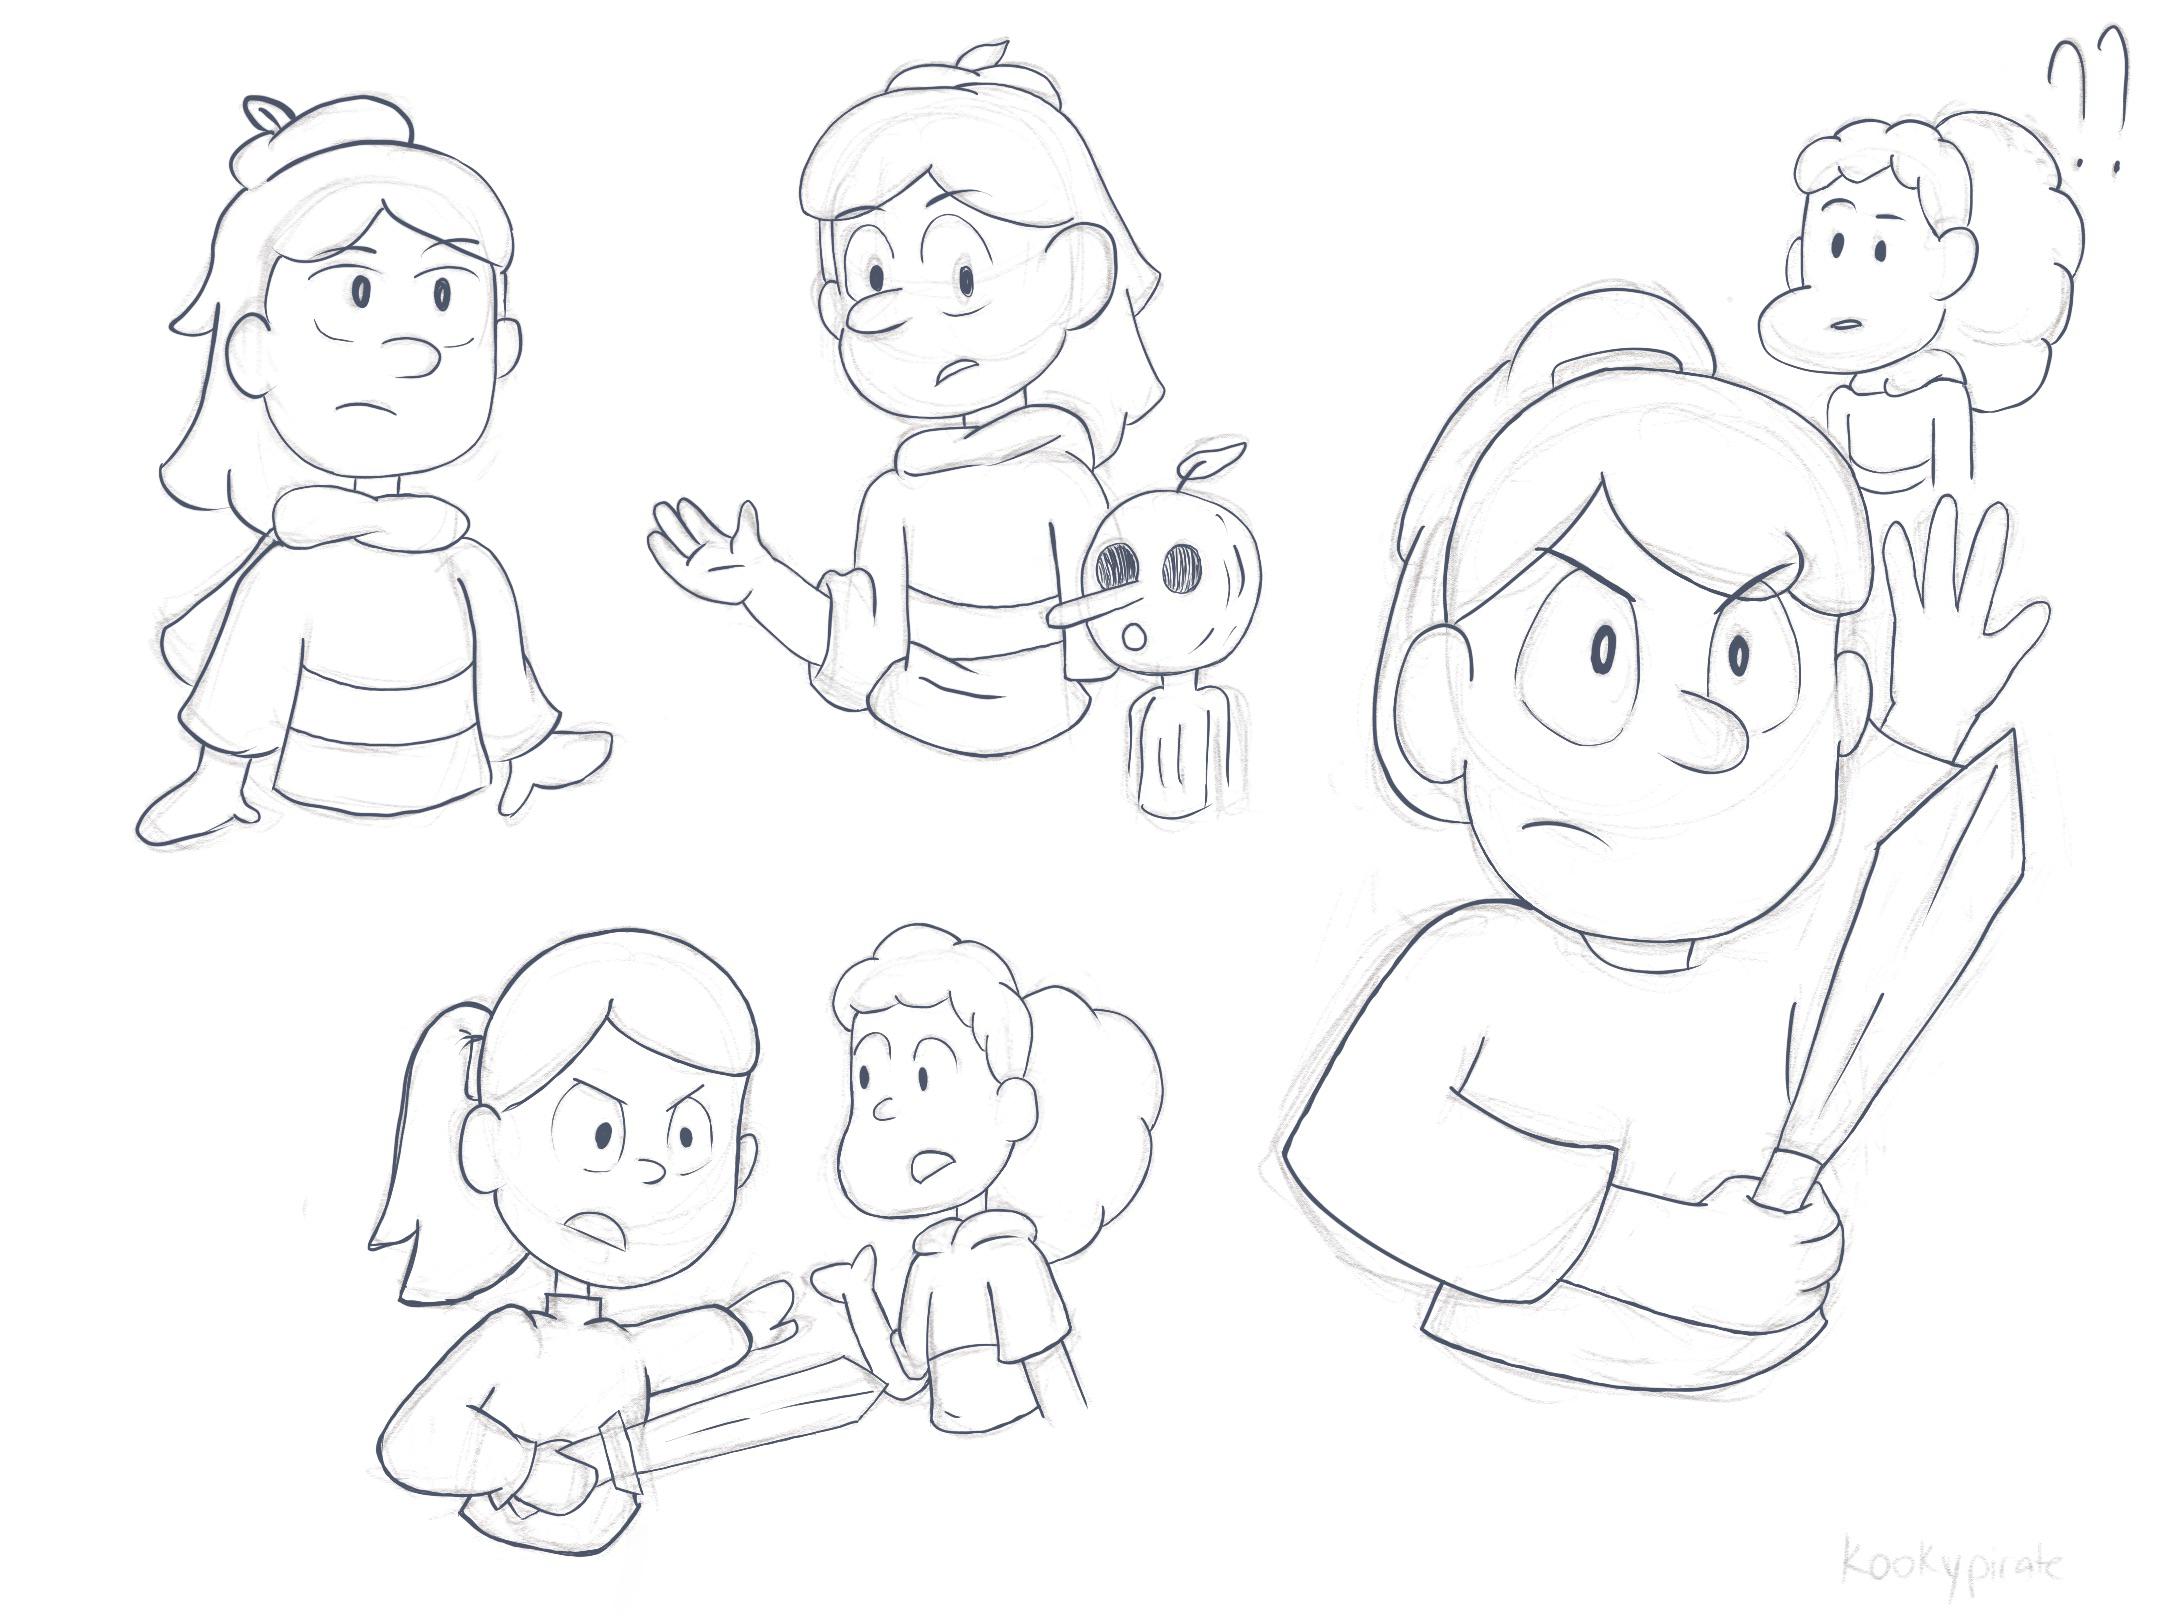 Tried to draw hilda and frida from memory : r/HildaTheSeries